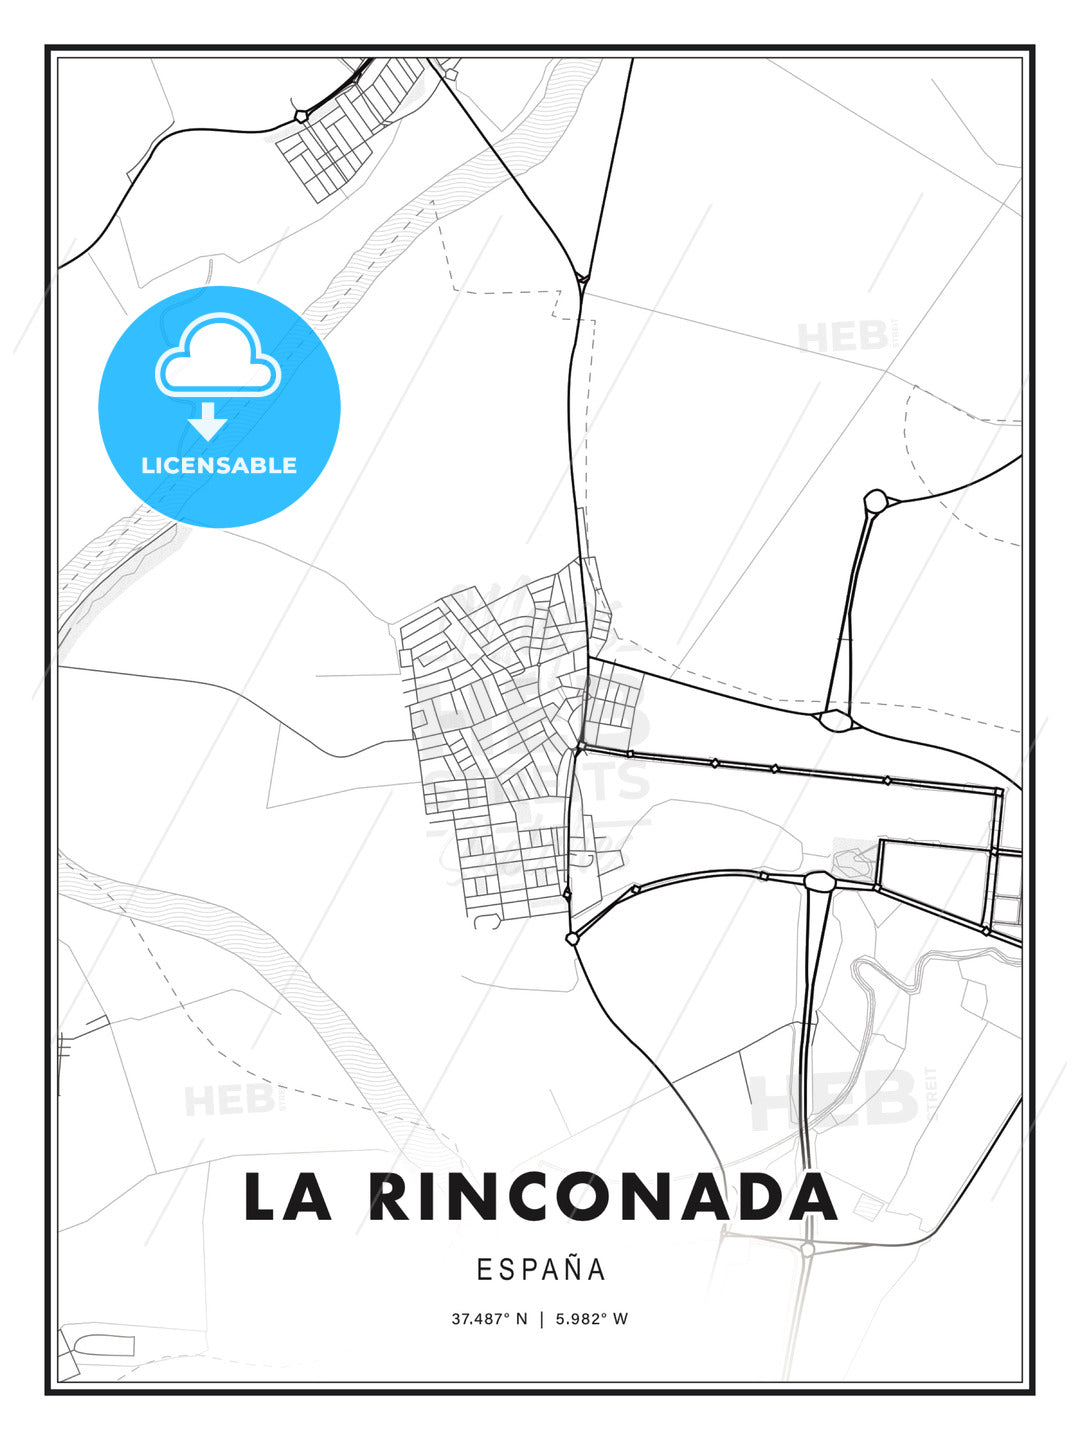 La Rinconada, Spain, Modern Print Template in Various Formats - HEBSTREITS Sketches